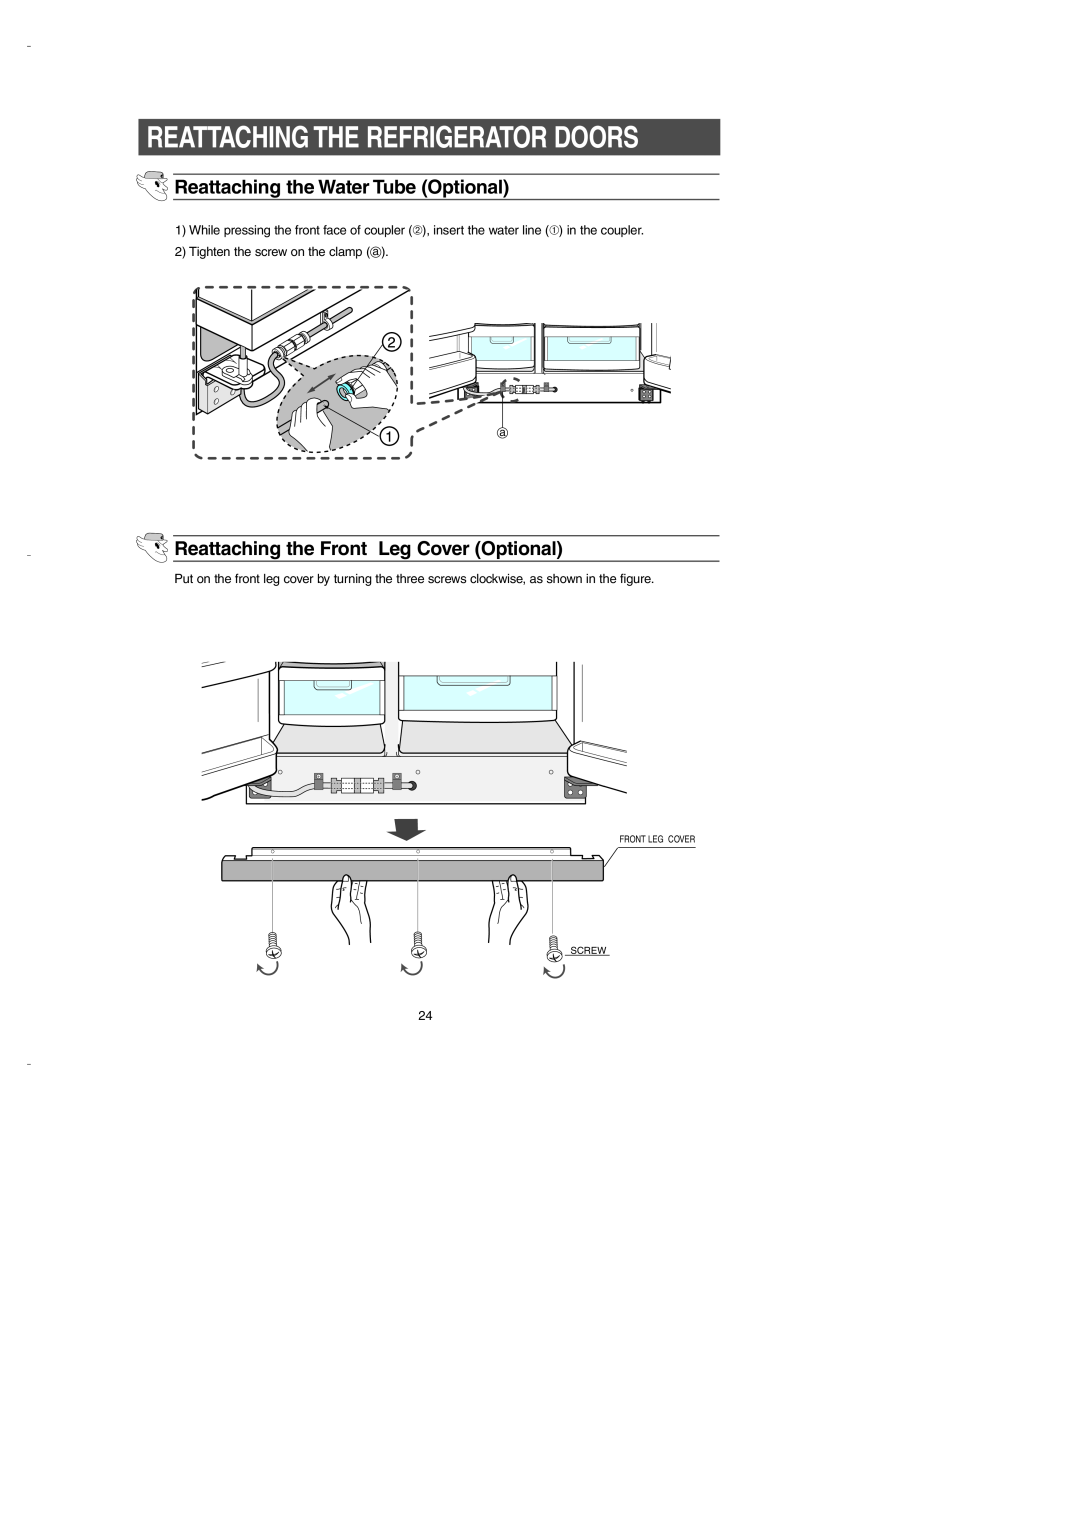 Samsung DA99-00275B owner manual Reattaching the Water Tube Optional, Reattaching the Front Leg Cover Optional 